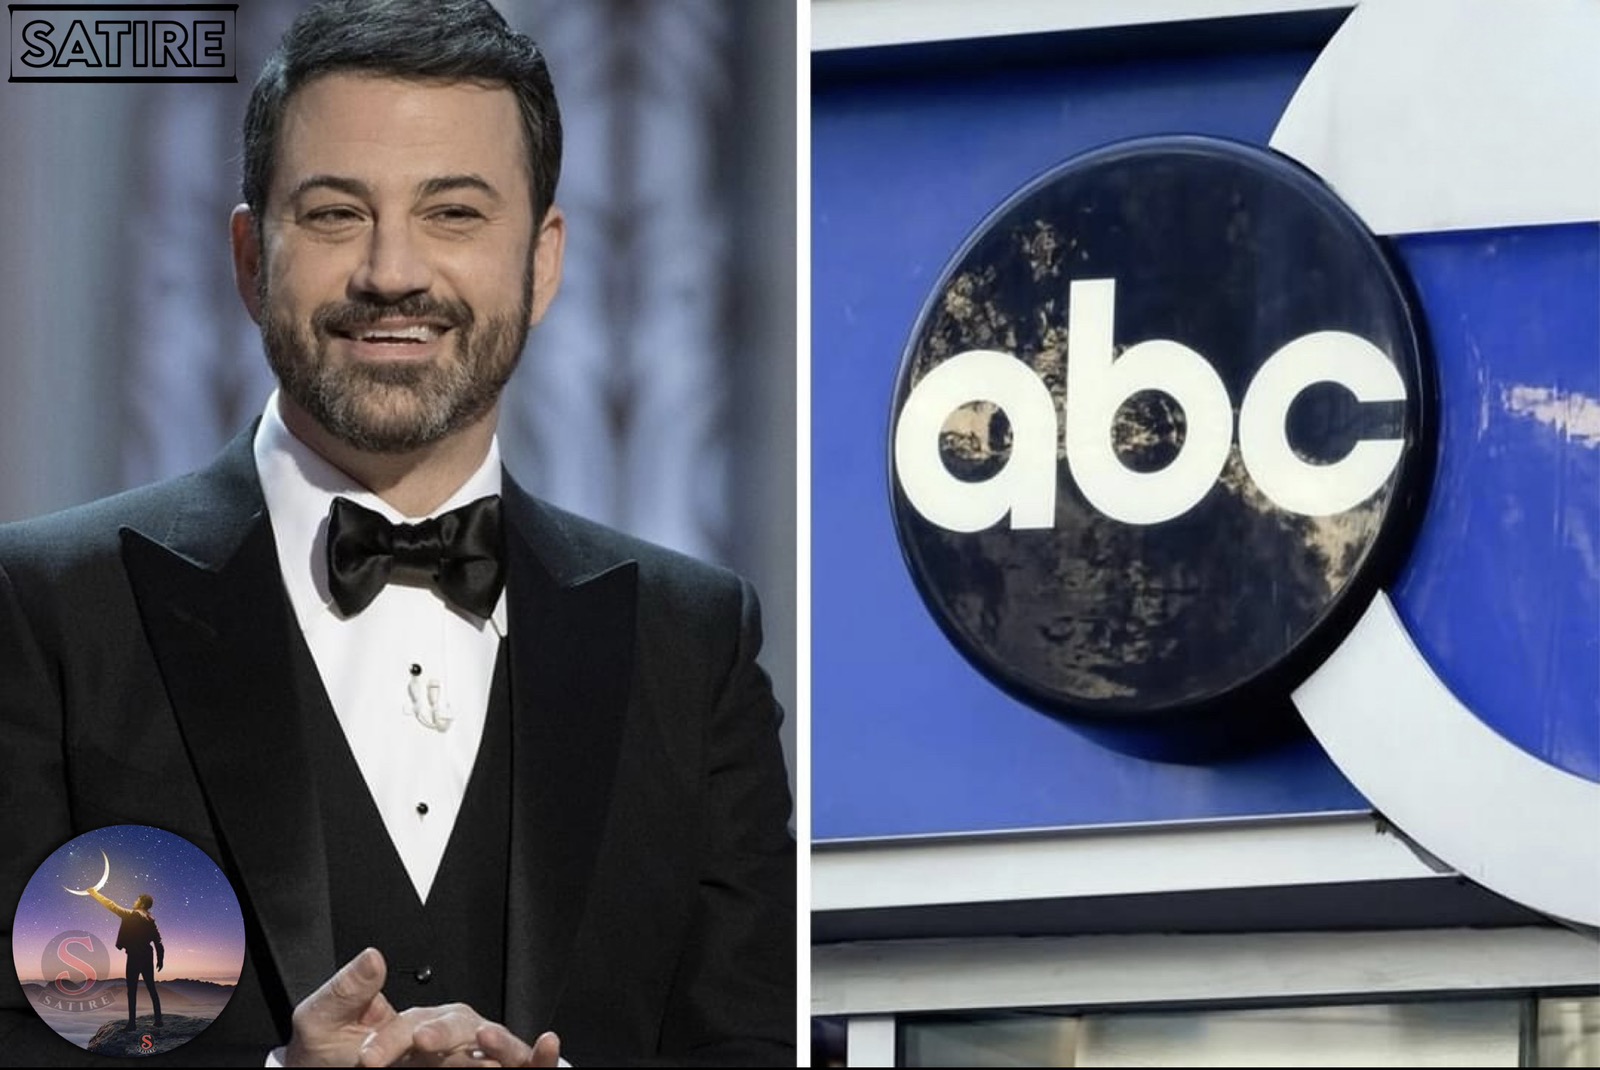 ABC Parts Ways with Jimmy Kimmel, Ending His Late-Night Show, Citing Creative Differences